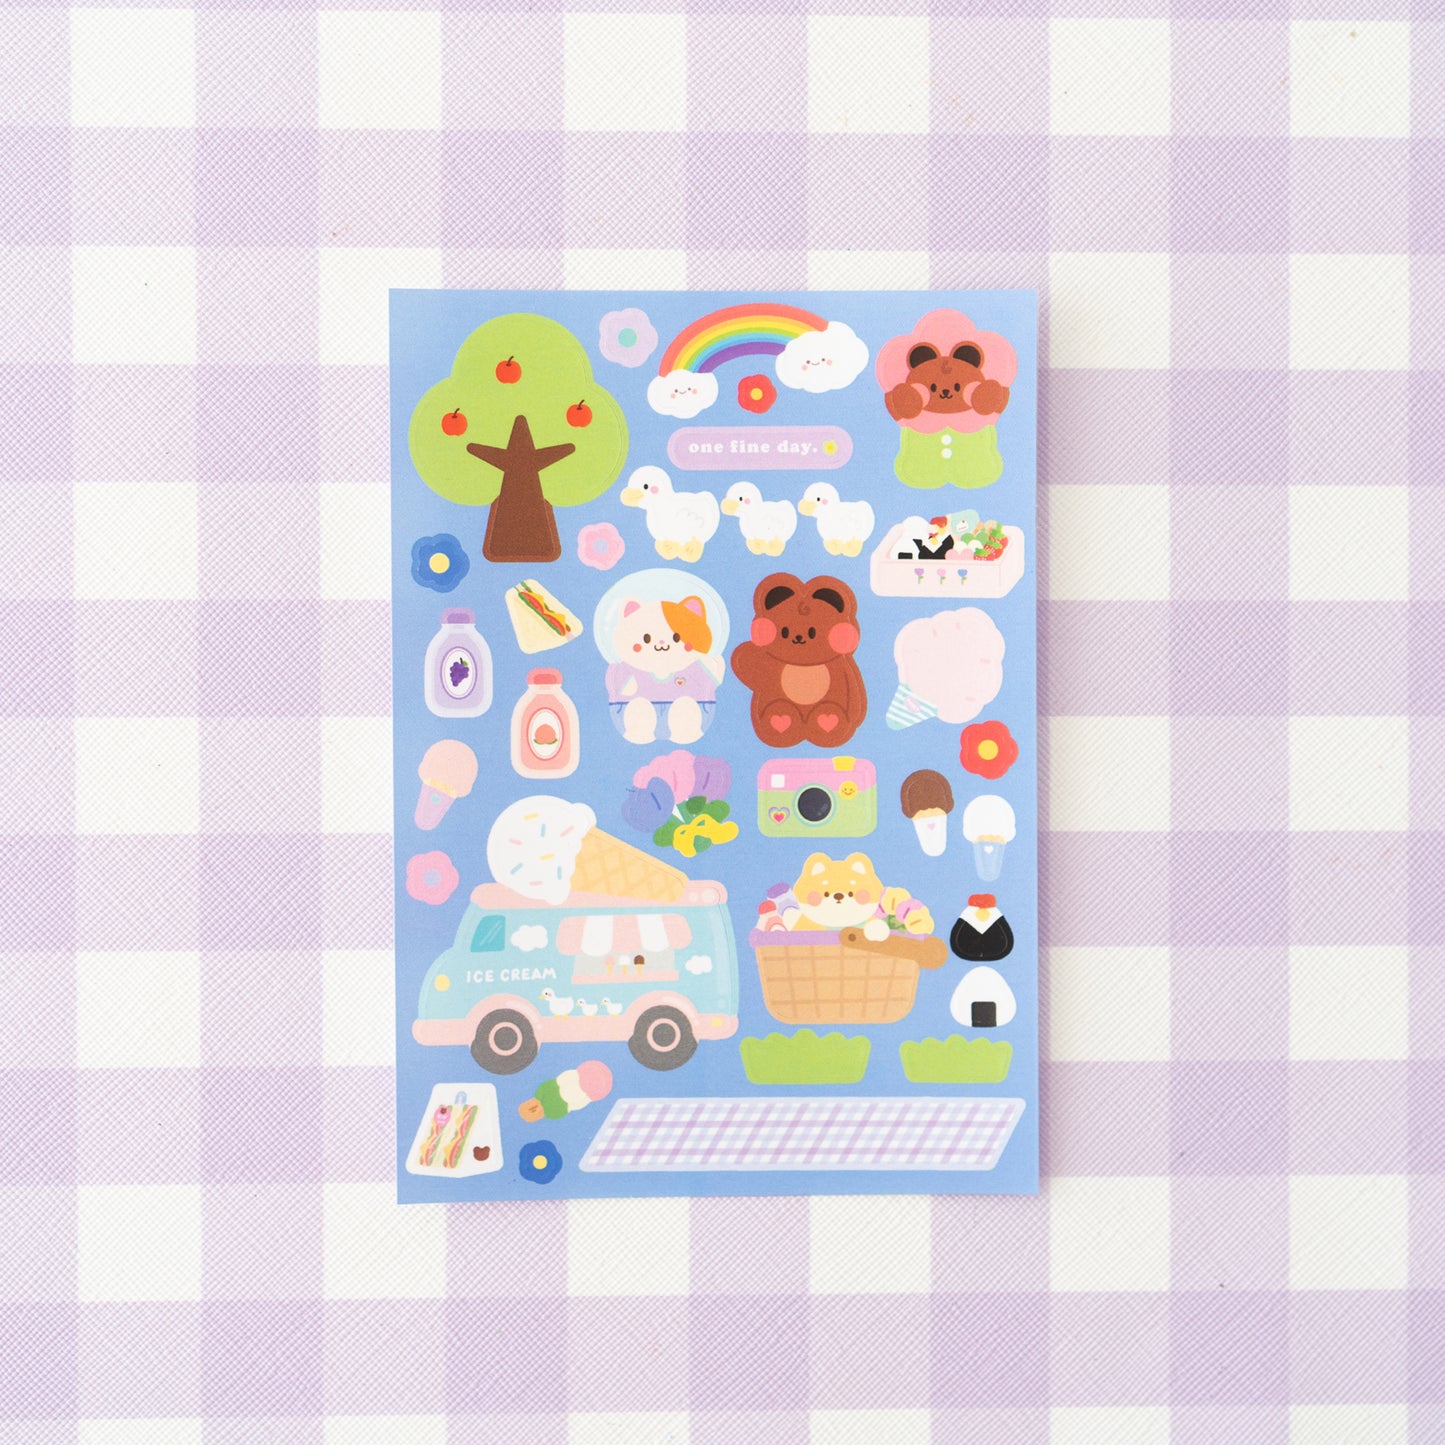 Picnic in the Park Journal Sticker Sheet